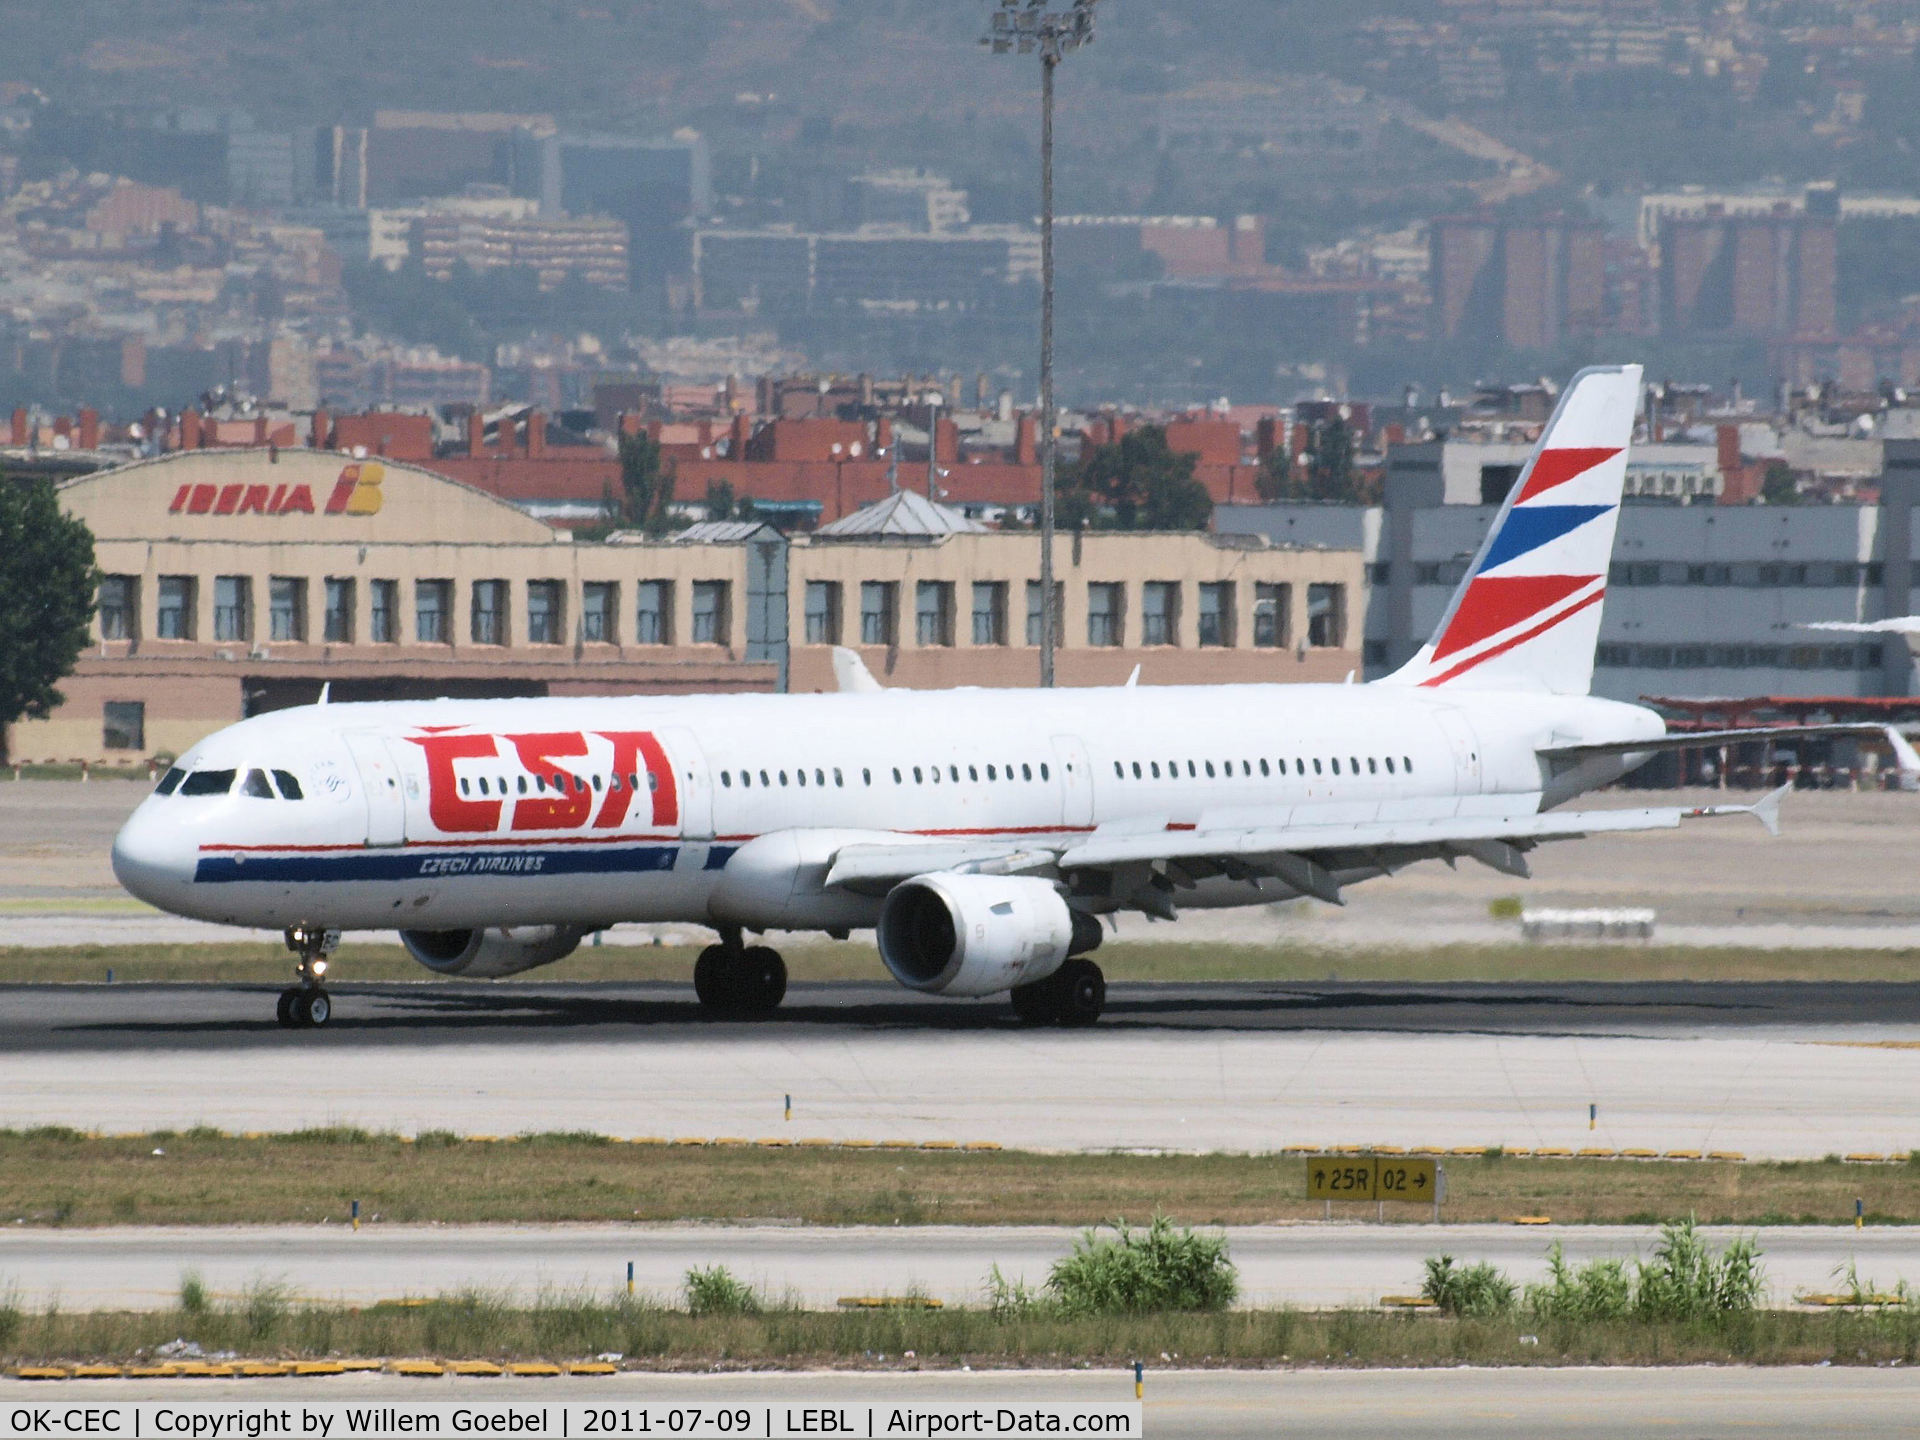 OK-CEC, 1997 Airbus A321-211 C/N 674, Arrival on Barcelona Airport